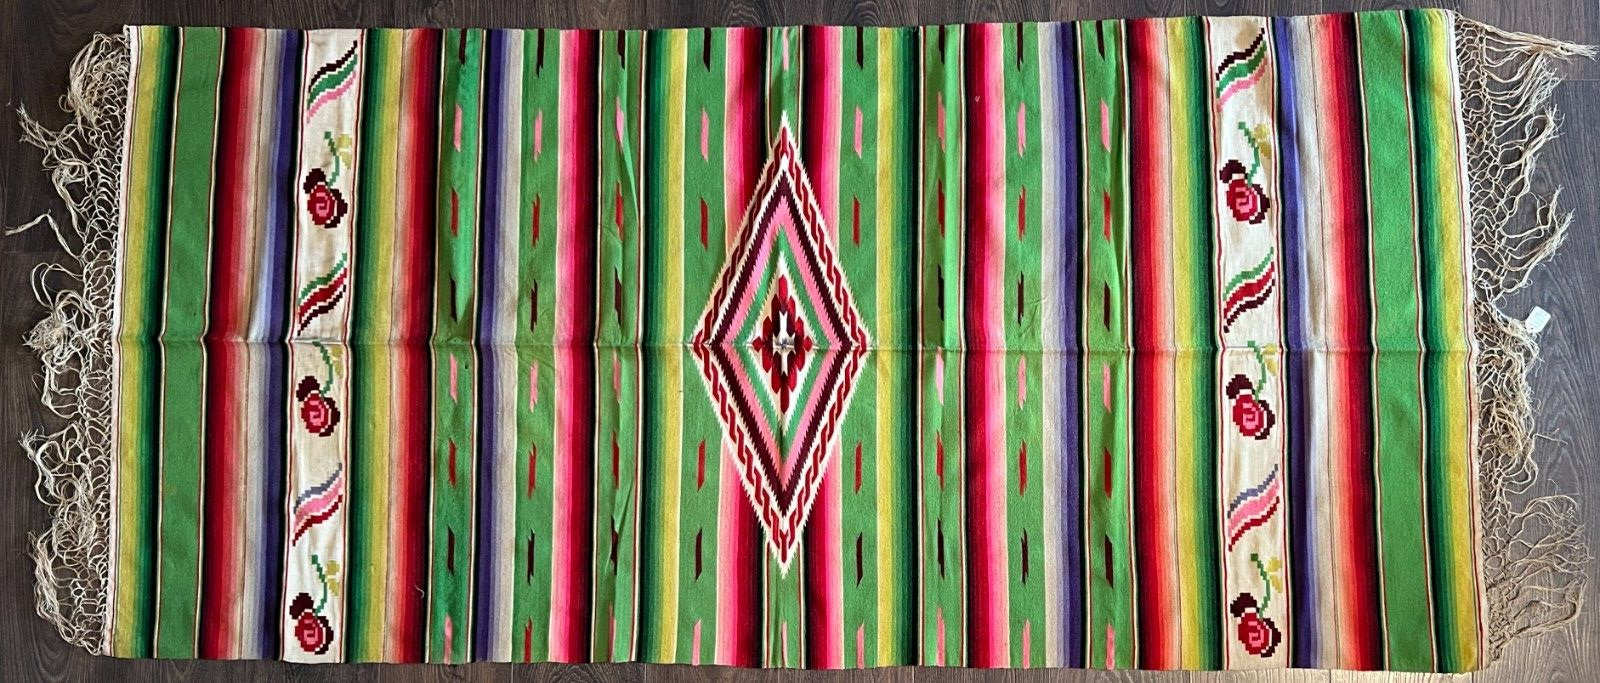 Large Antique 1930s Mexican Native American Indian Blanket Rug Tapestry, 78 x 37